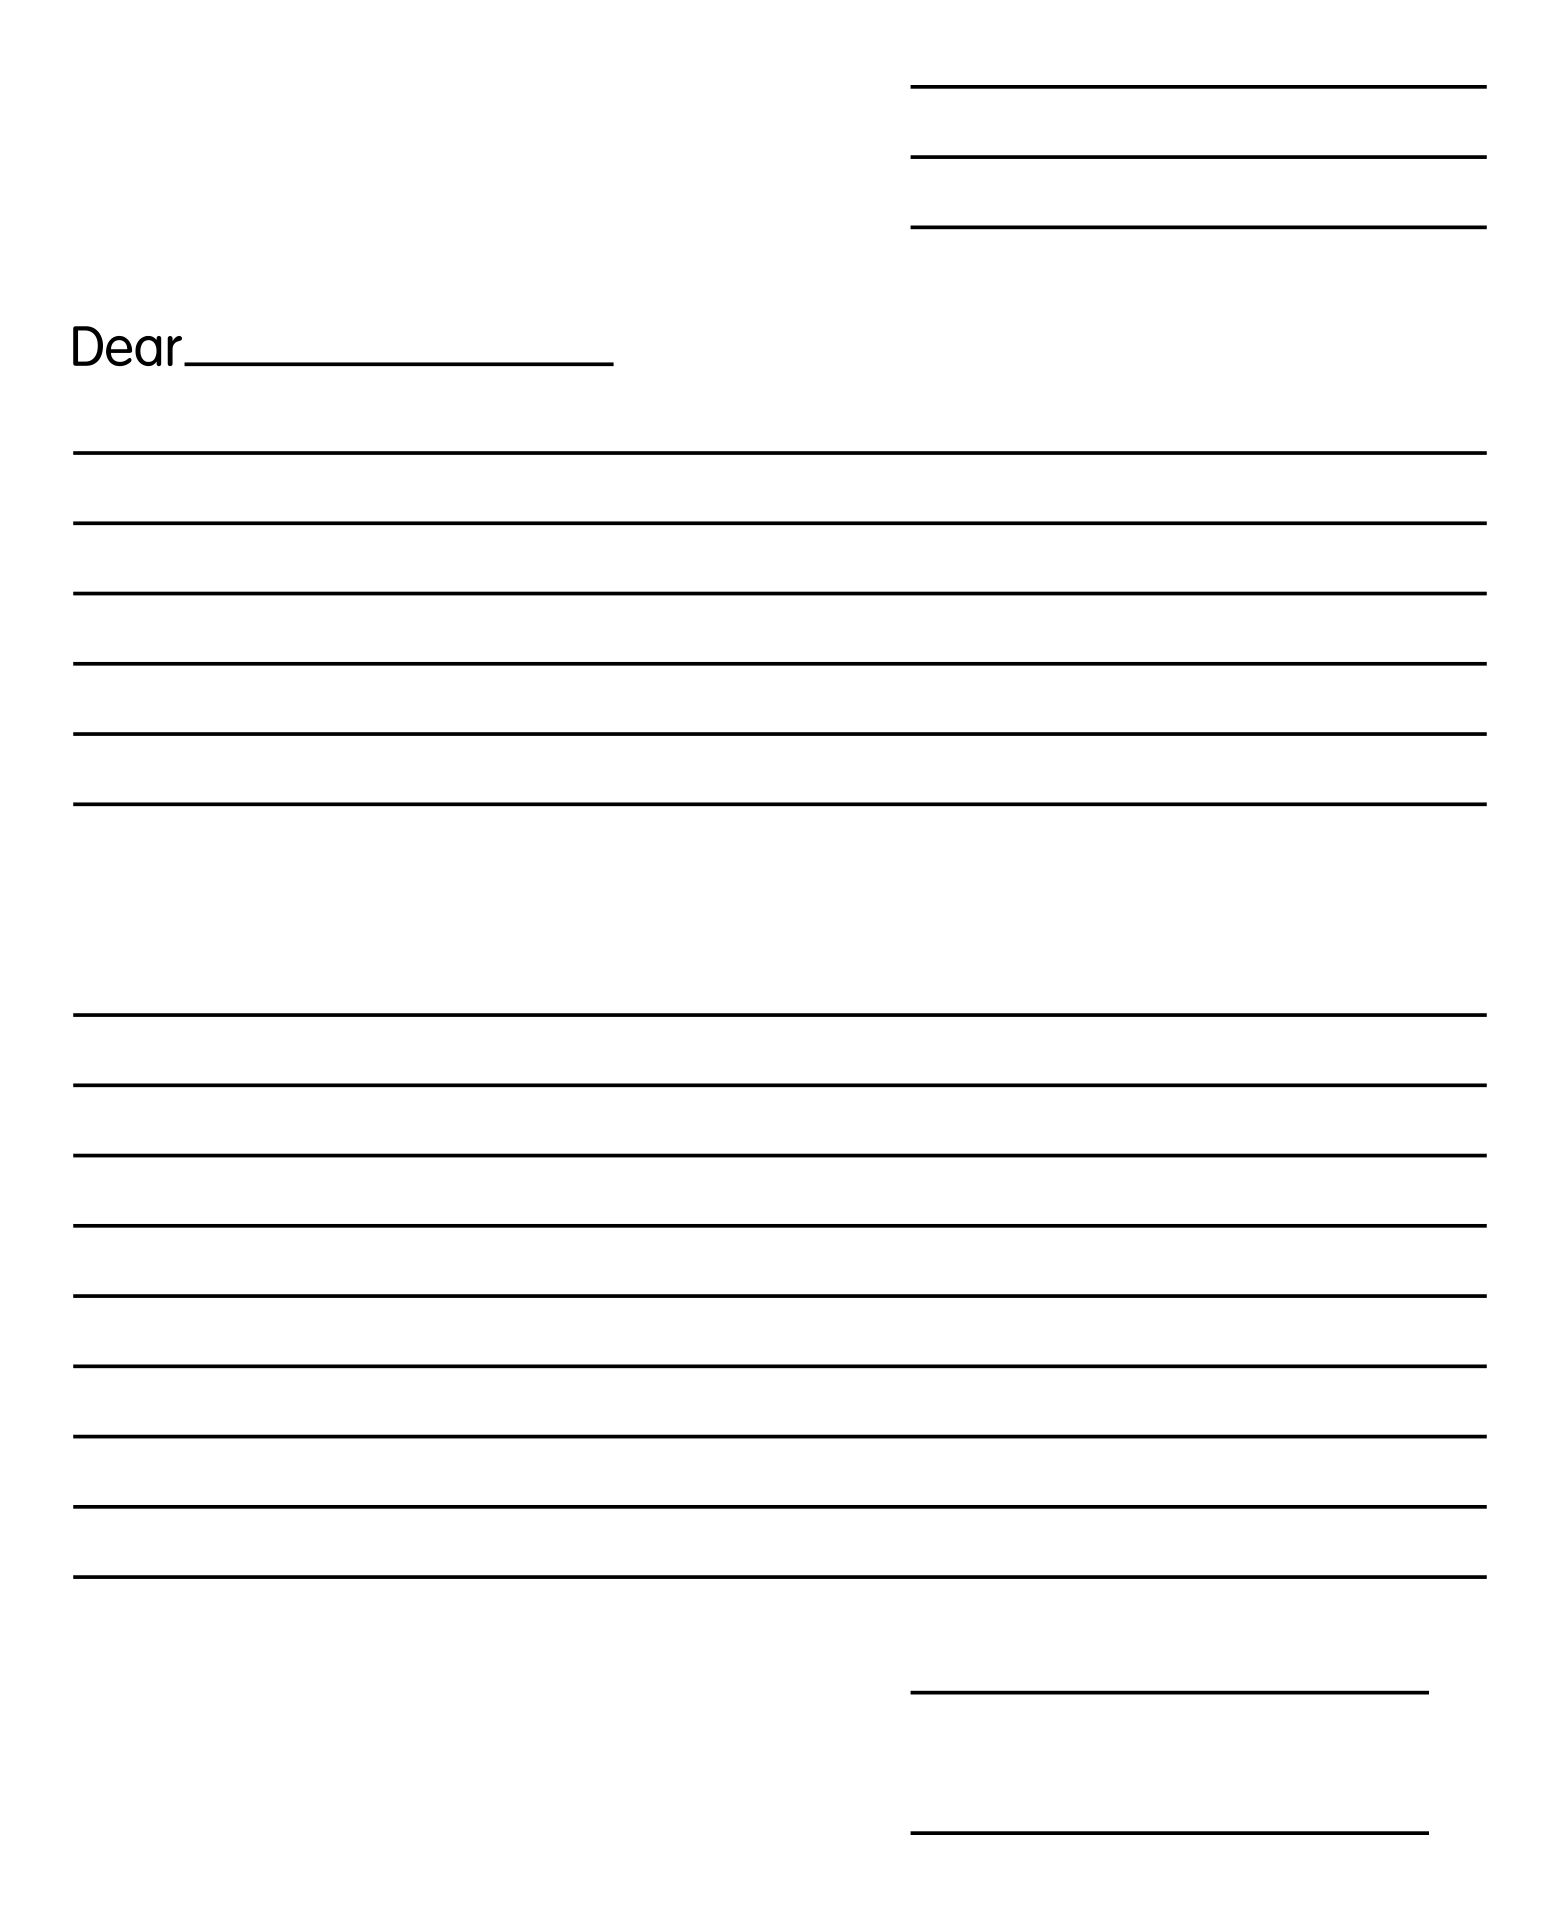 Printable Sample Friendly Collection Letter